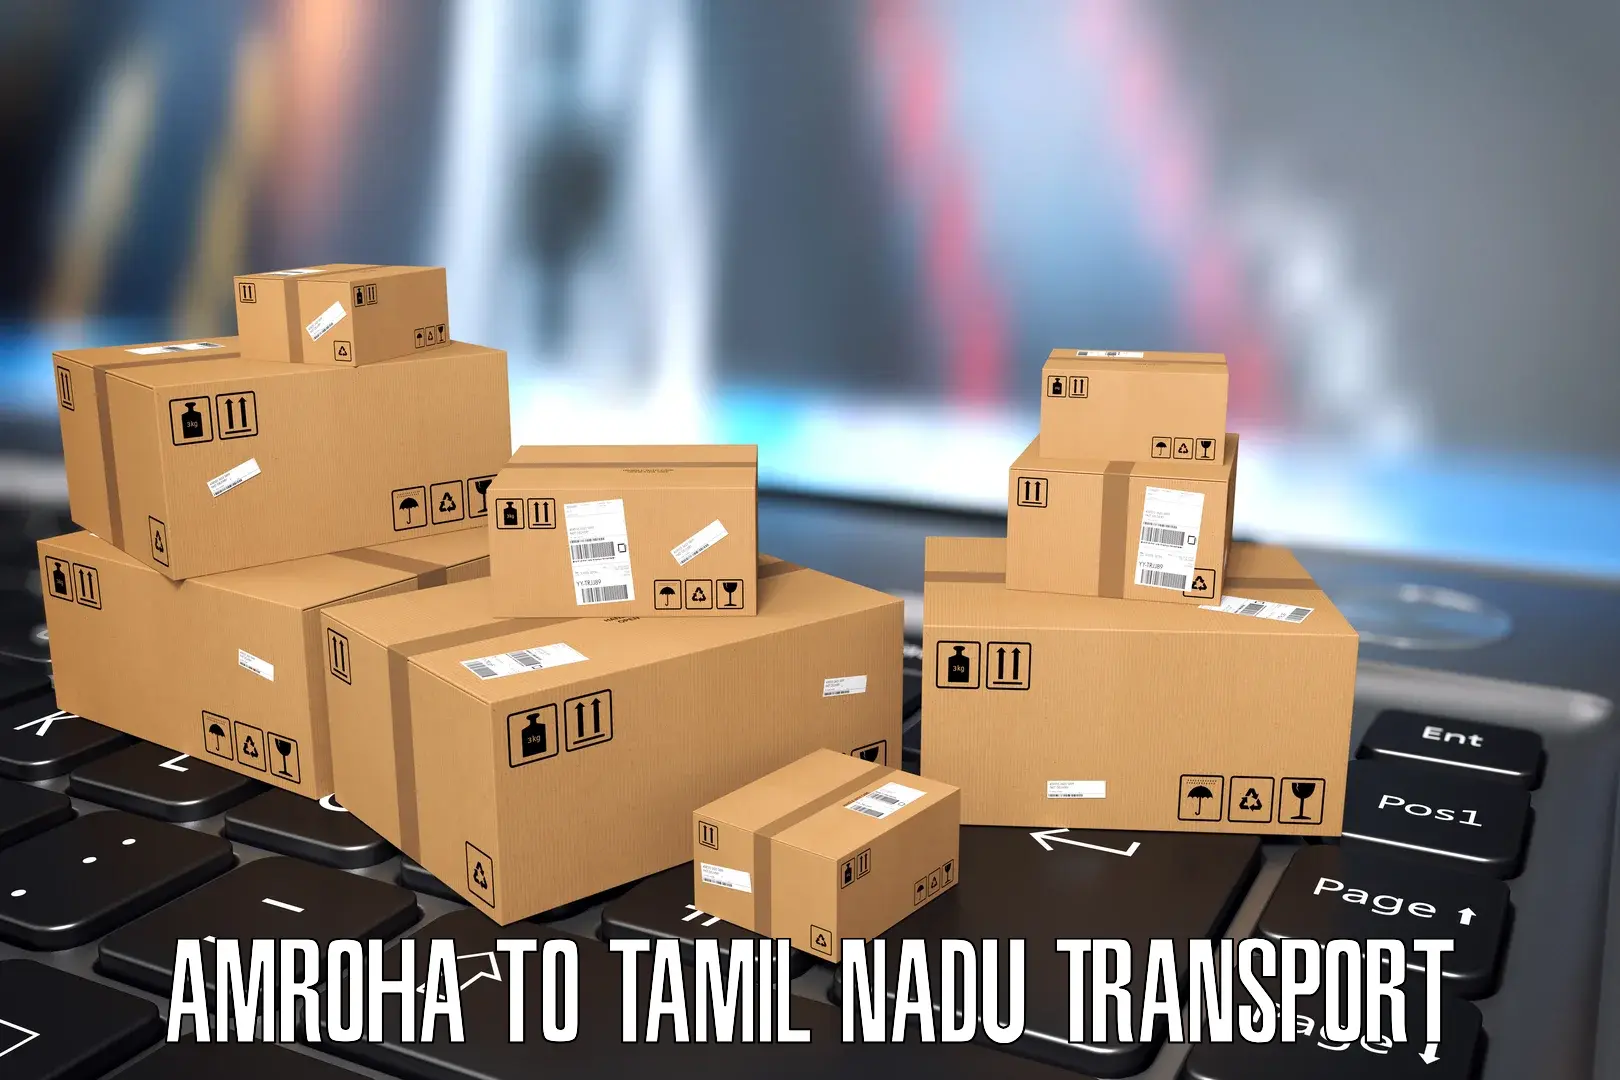 Container transport service Amroha to Tamil Nadu